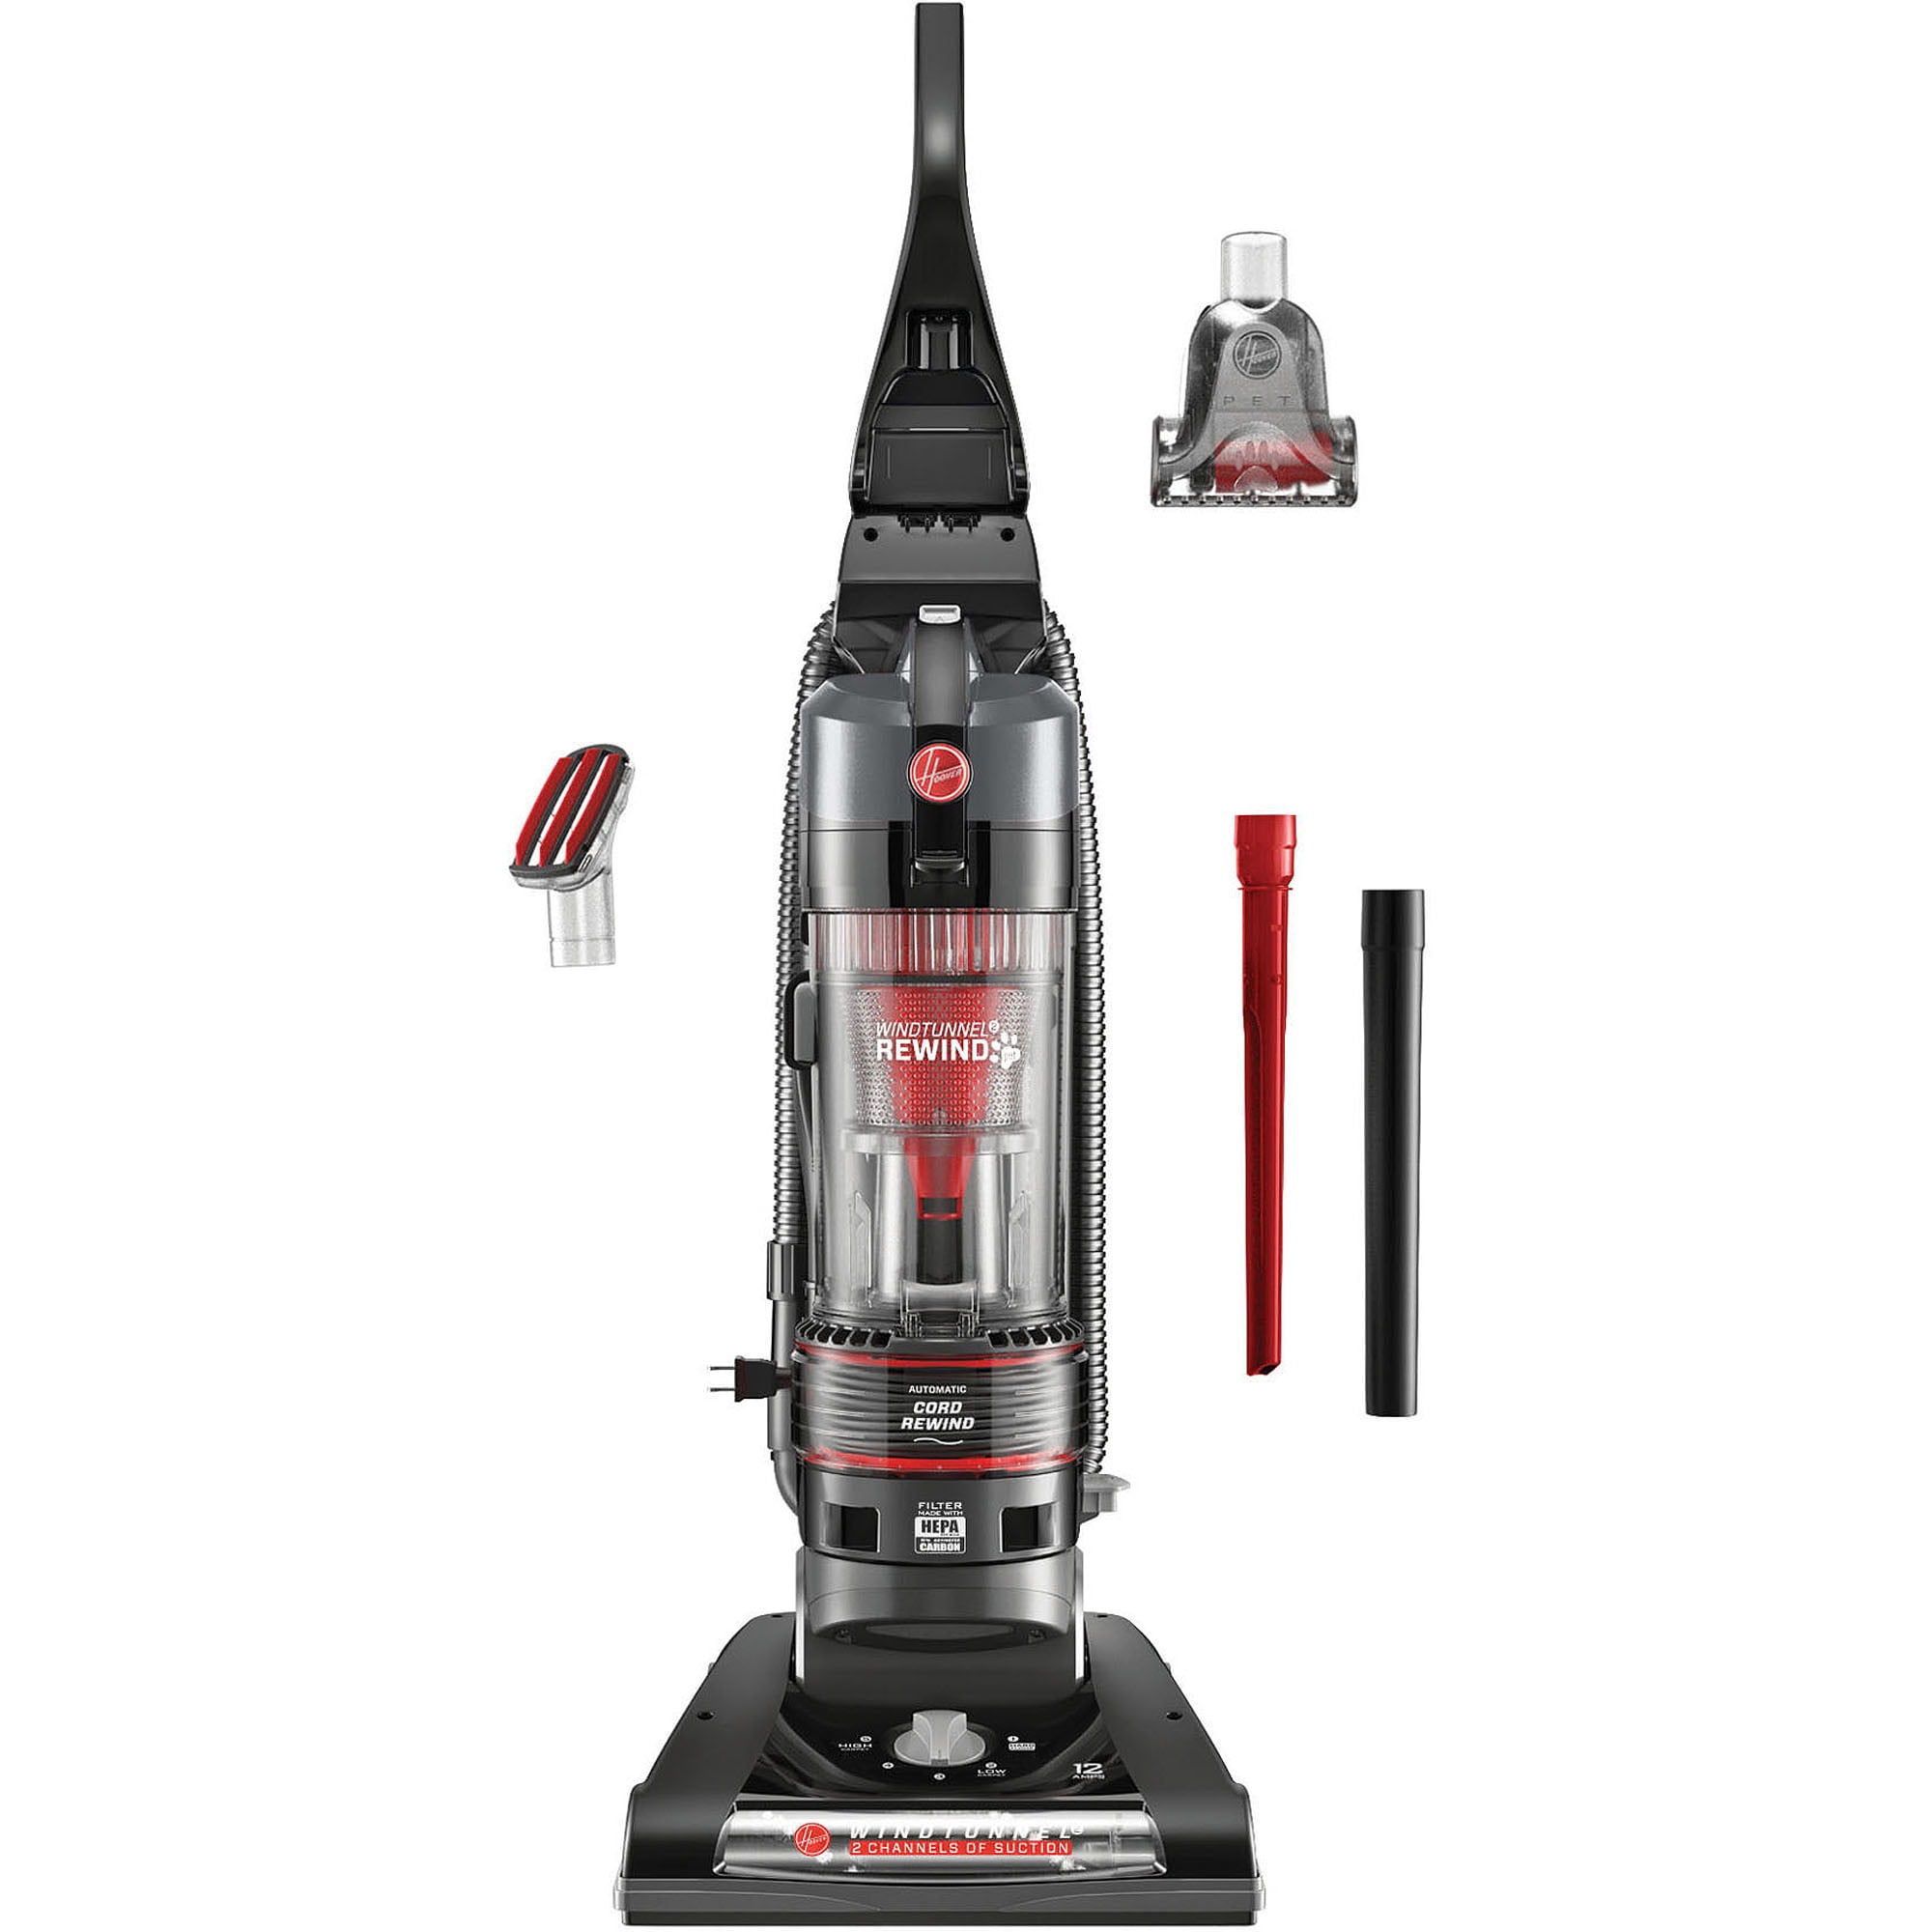 Who should buy the Hoover Windtunnel Cord Rewind Upright Vacuum Cleaner?